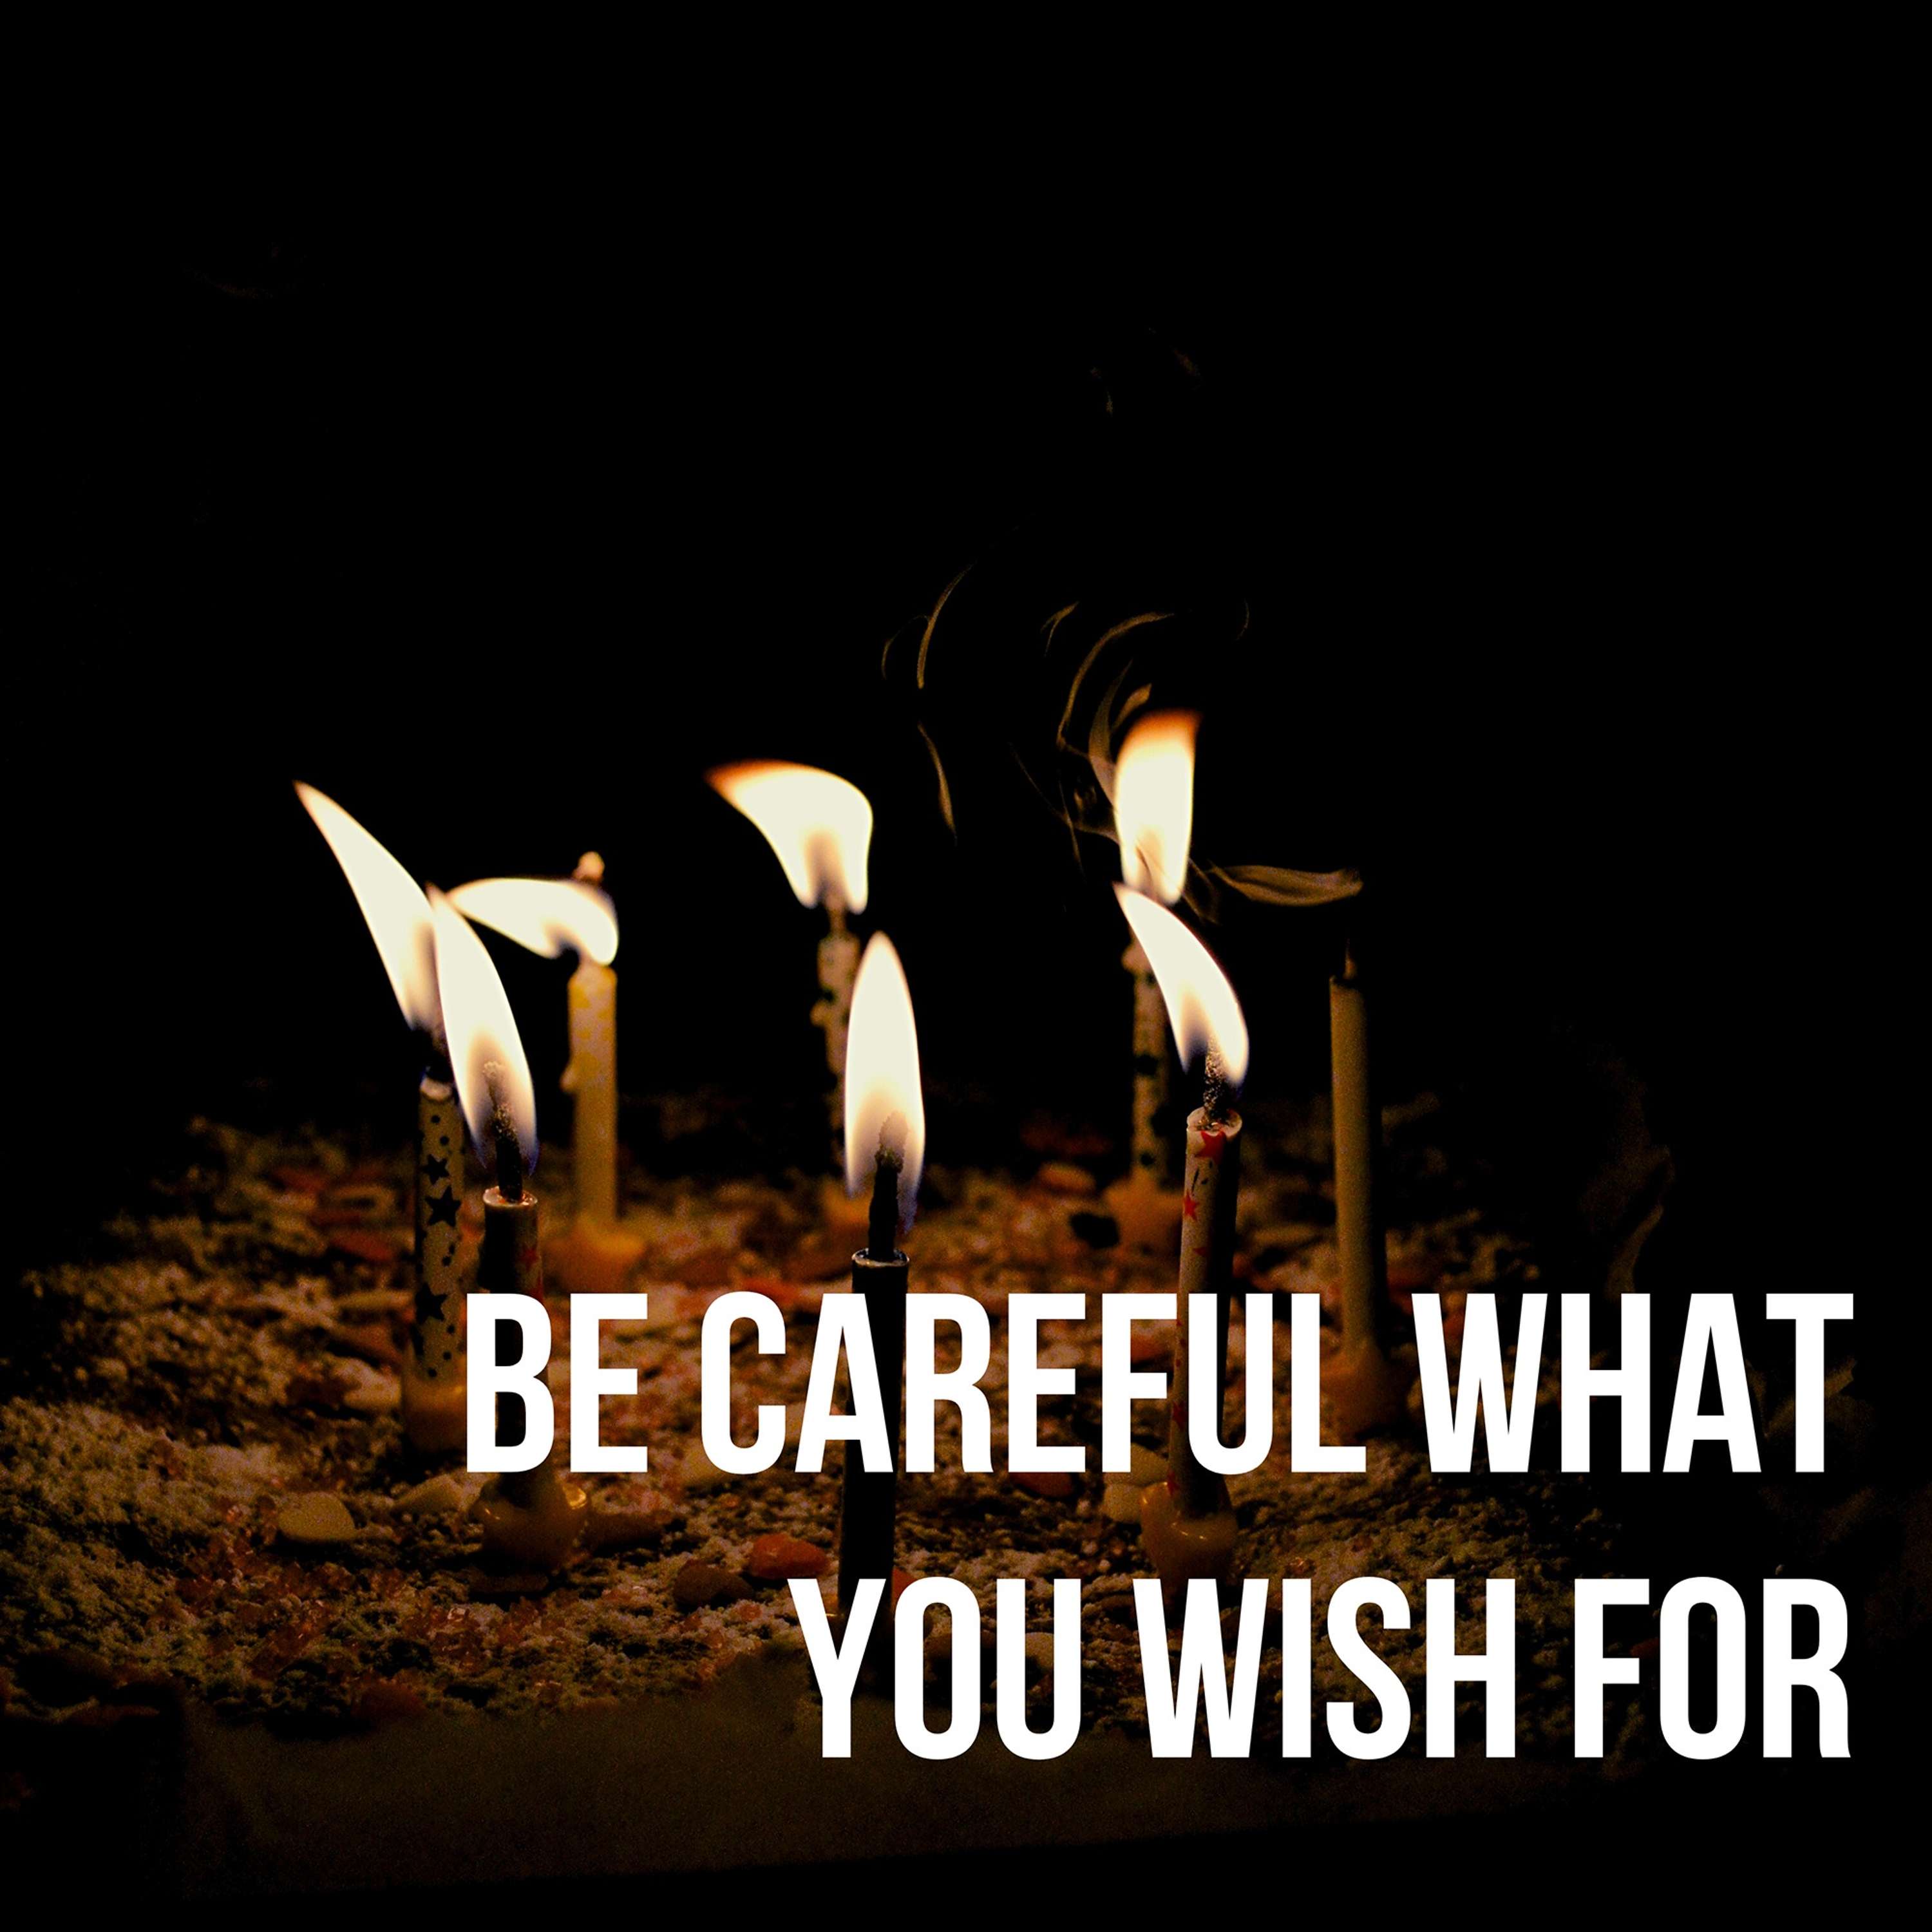 54: Be Careful What You Wish For